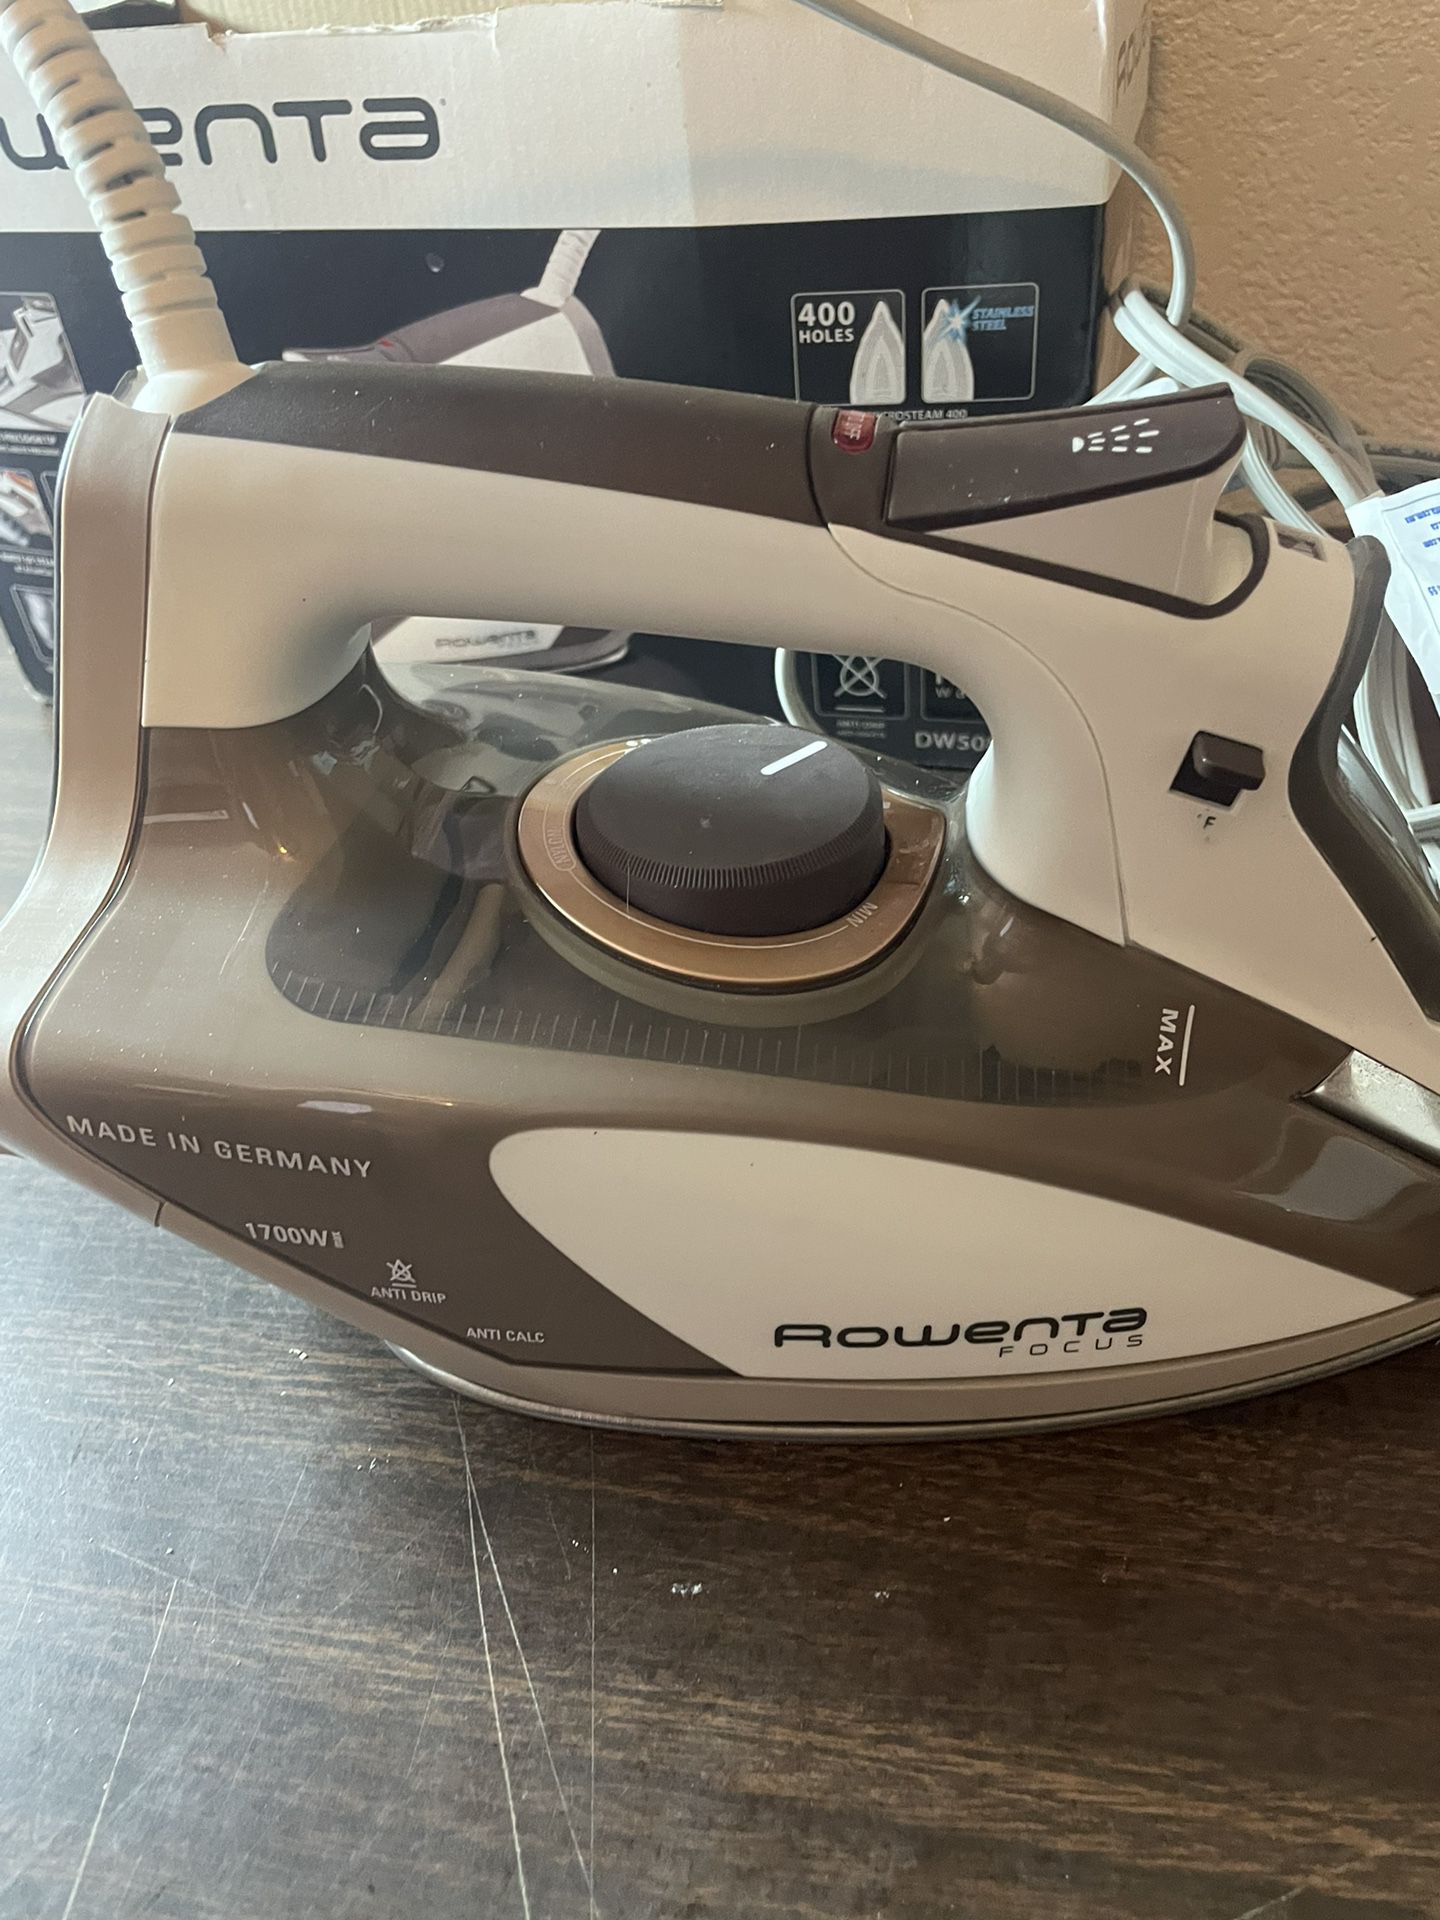 Rowenta Focus DW5080 1700W Micro Steam Iron Made in Germany w/ box & sole plate